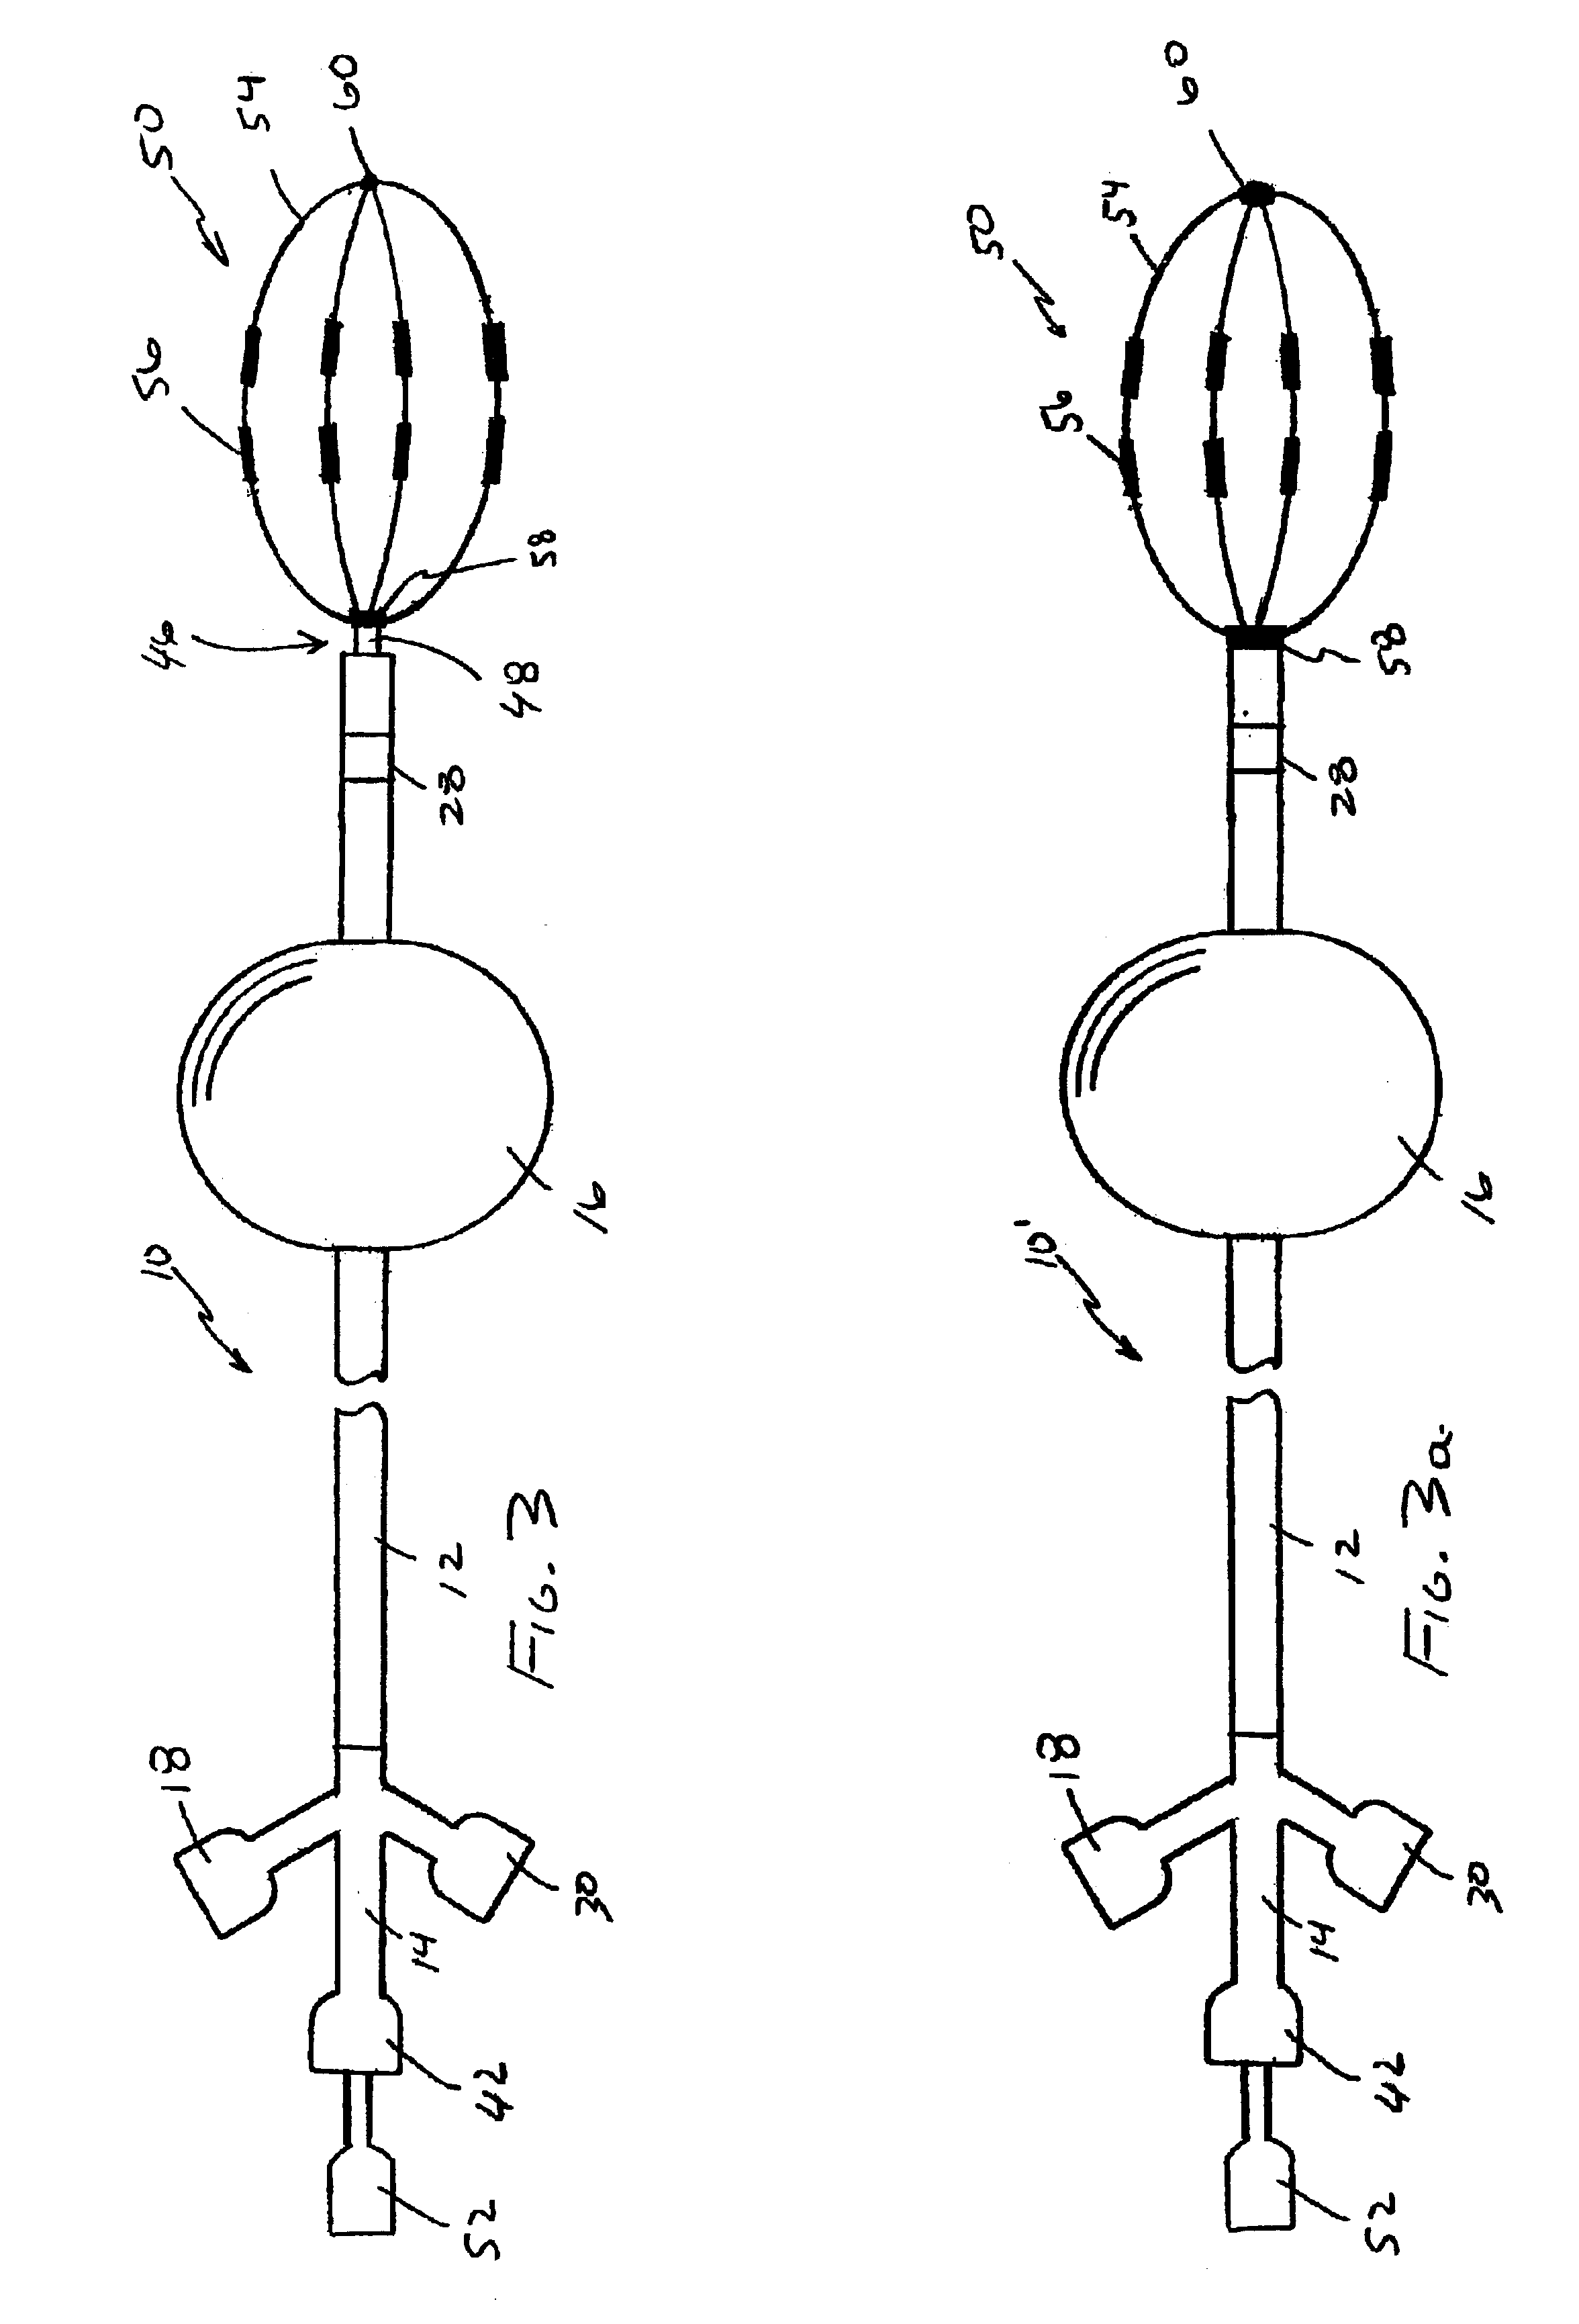 Apparatus for mapping and coagulating soft tissue in or around body orifices